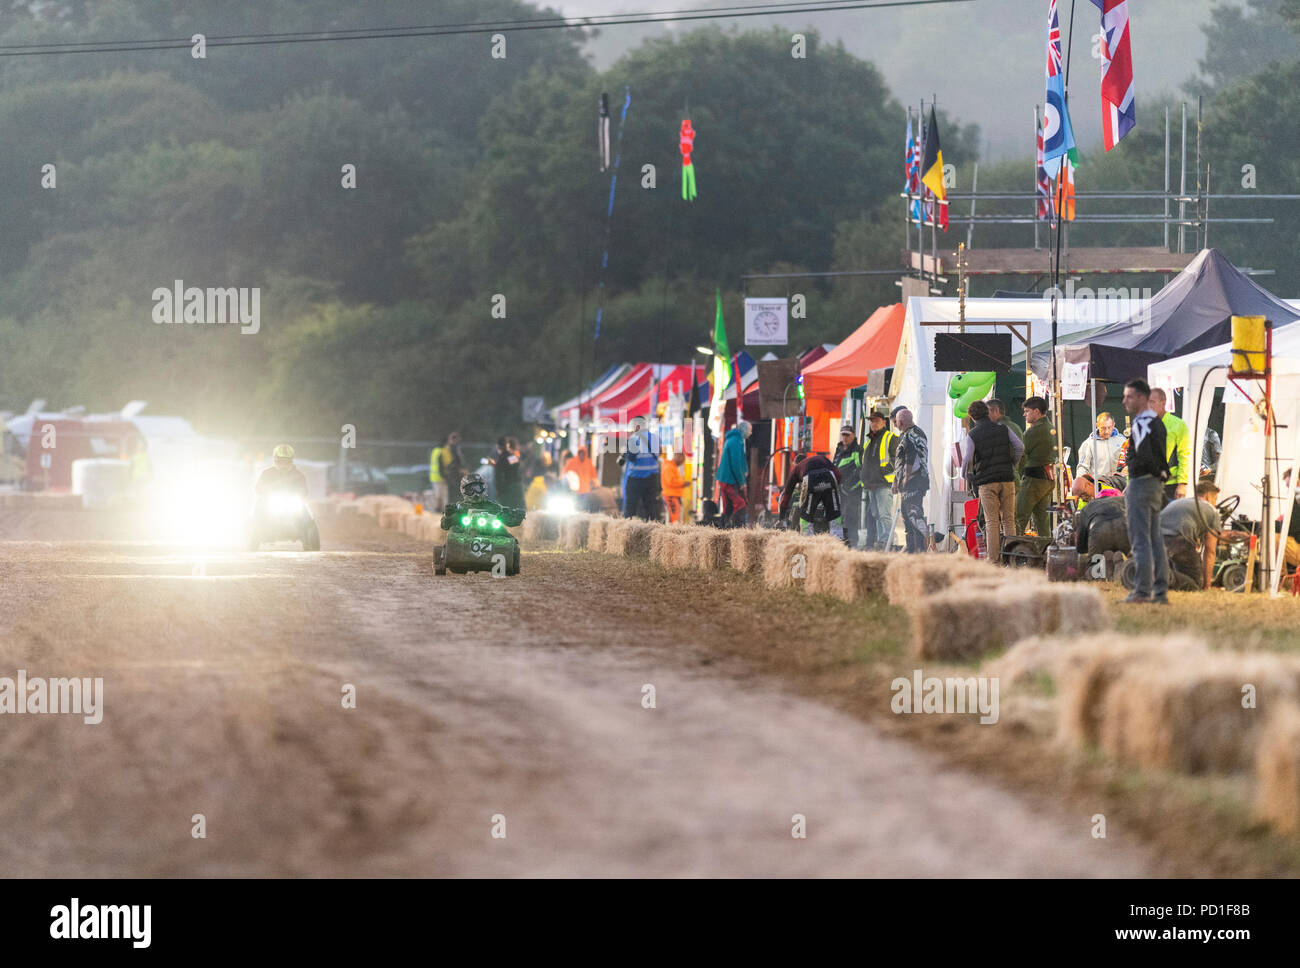 The 12 hour endurance lawnmower race, organised by the British Lawn Mower Racing Association, started at 8pm on Saturday and teams from around the world raced through the night to the finish line at 8am Sunday morning. Credit: Richard Grange/Alamy Live News Stock Photo